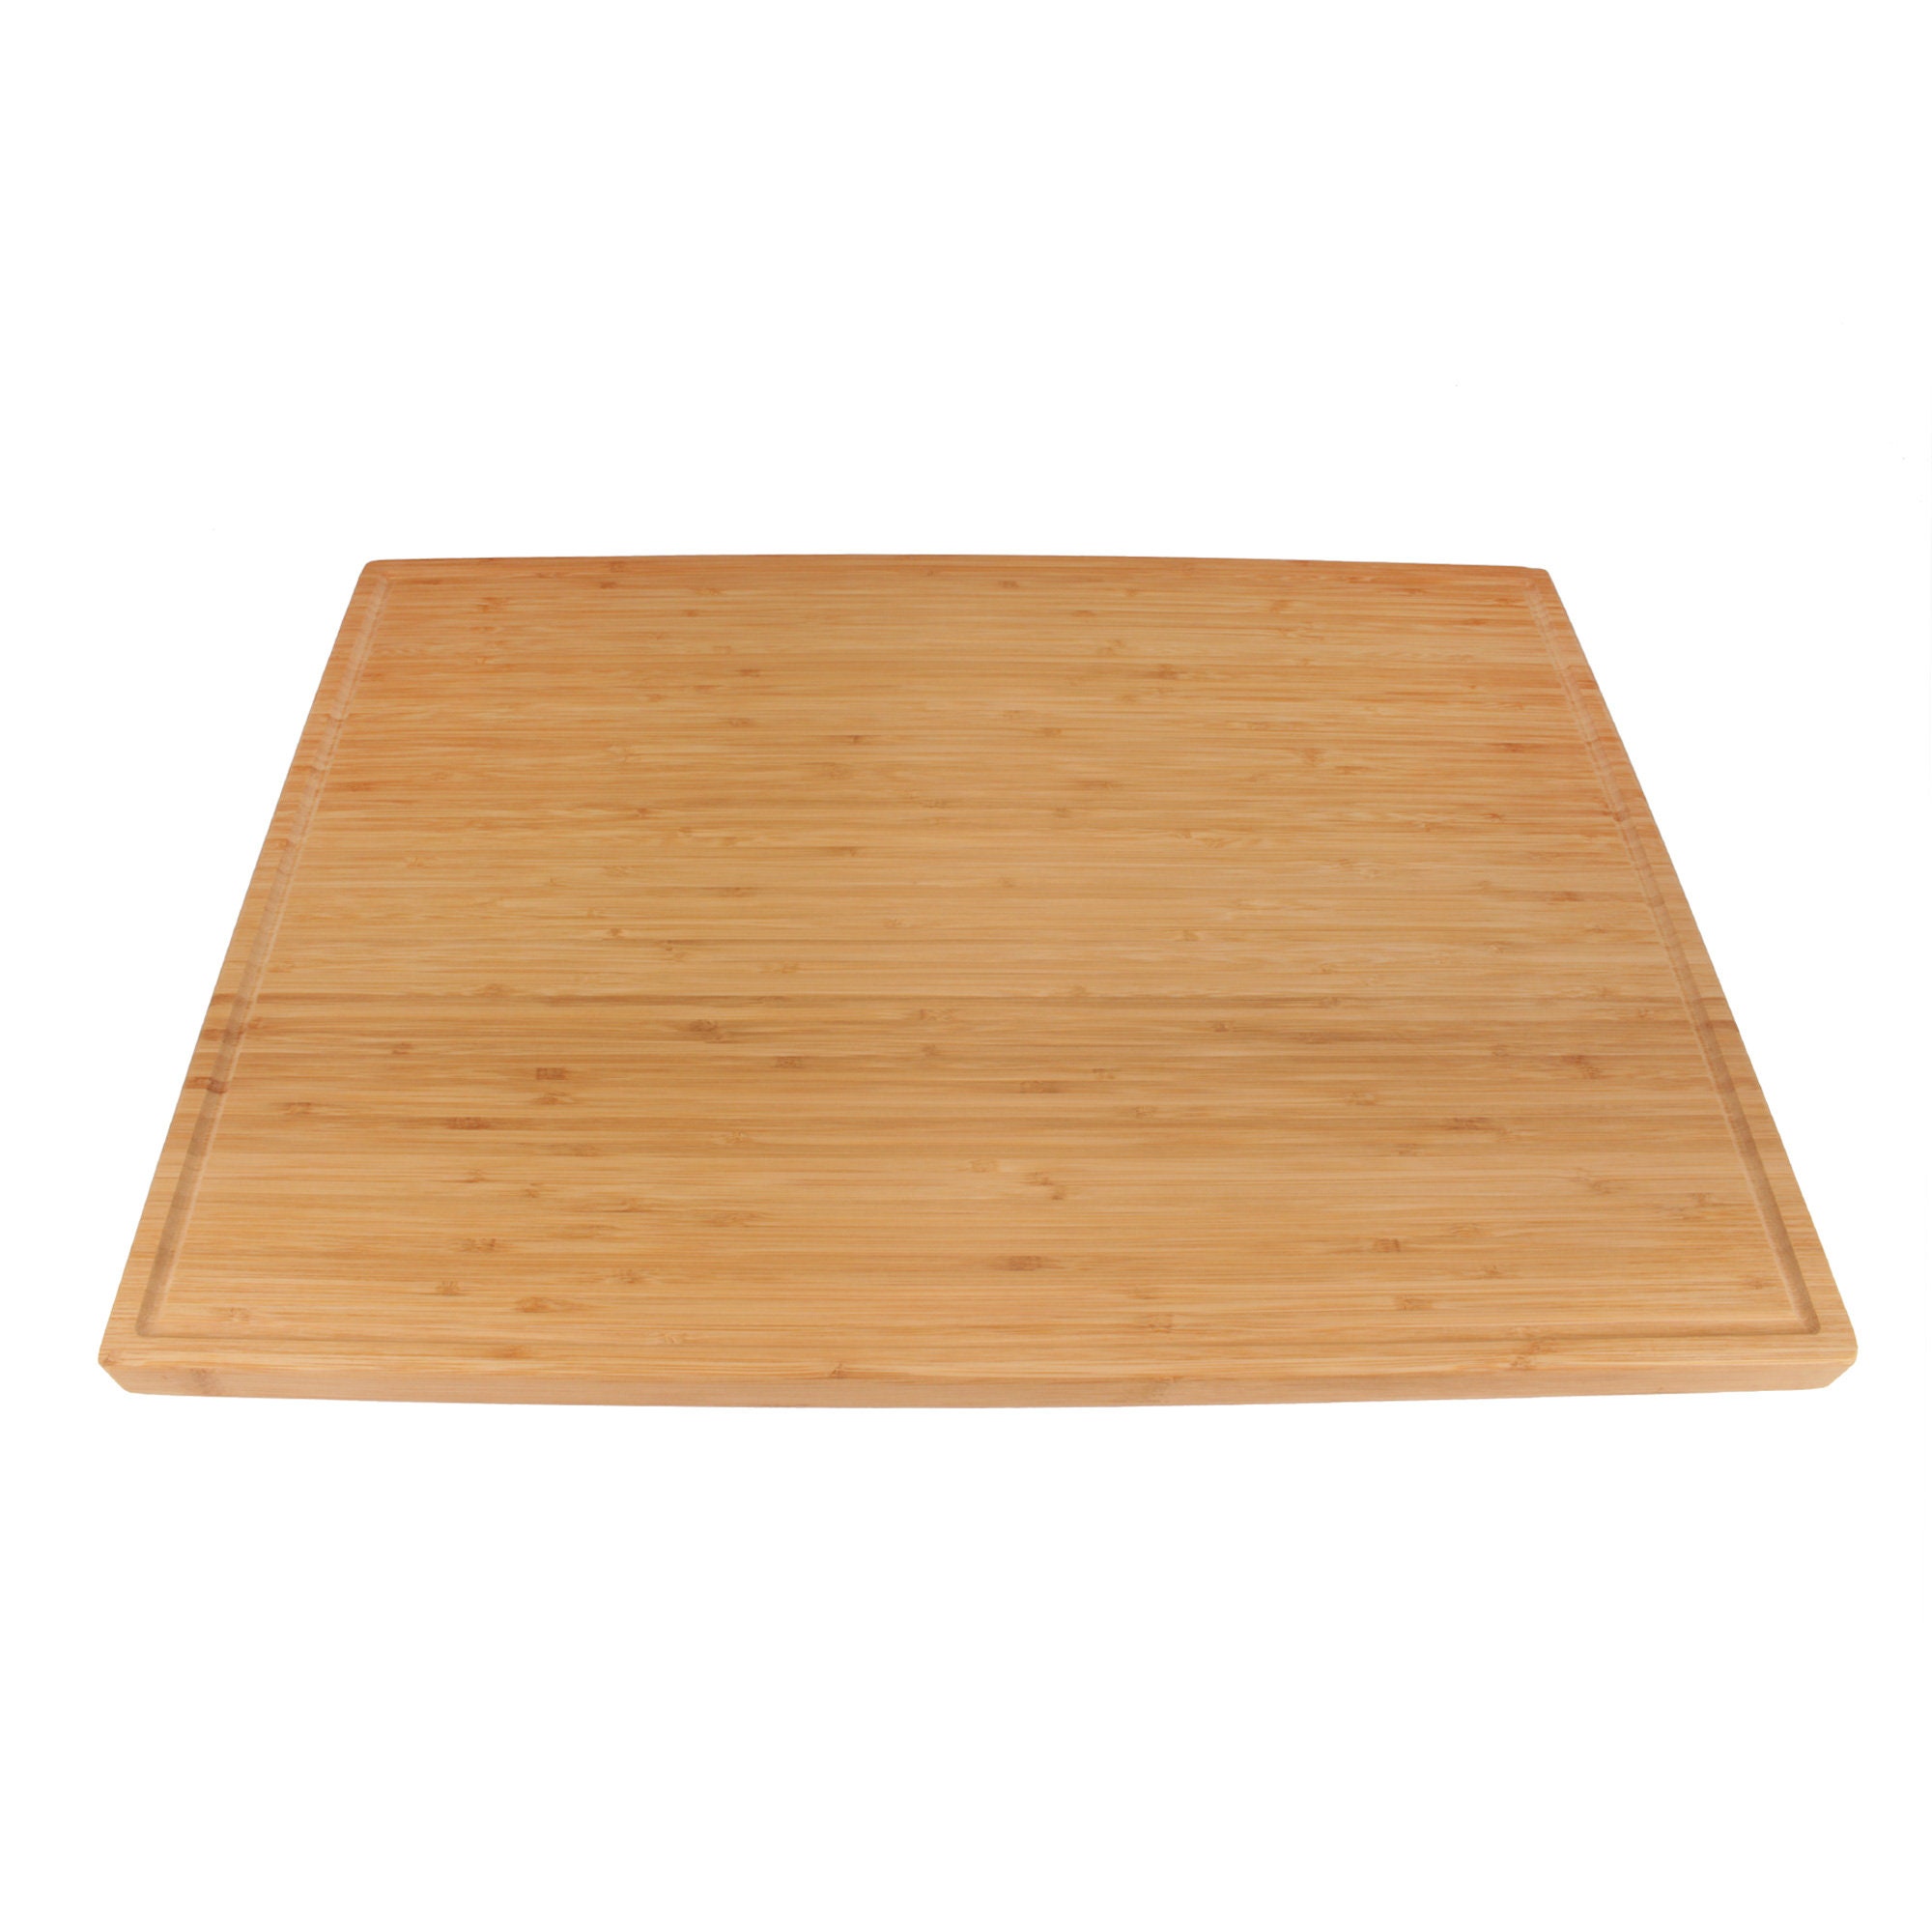 BambooMN Heavy Duty Premium Extra Large Thick Bamboo Cutting Board - 24 x  18 x 1.5 (Grooved) 